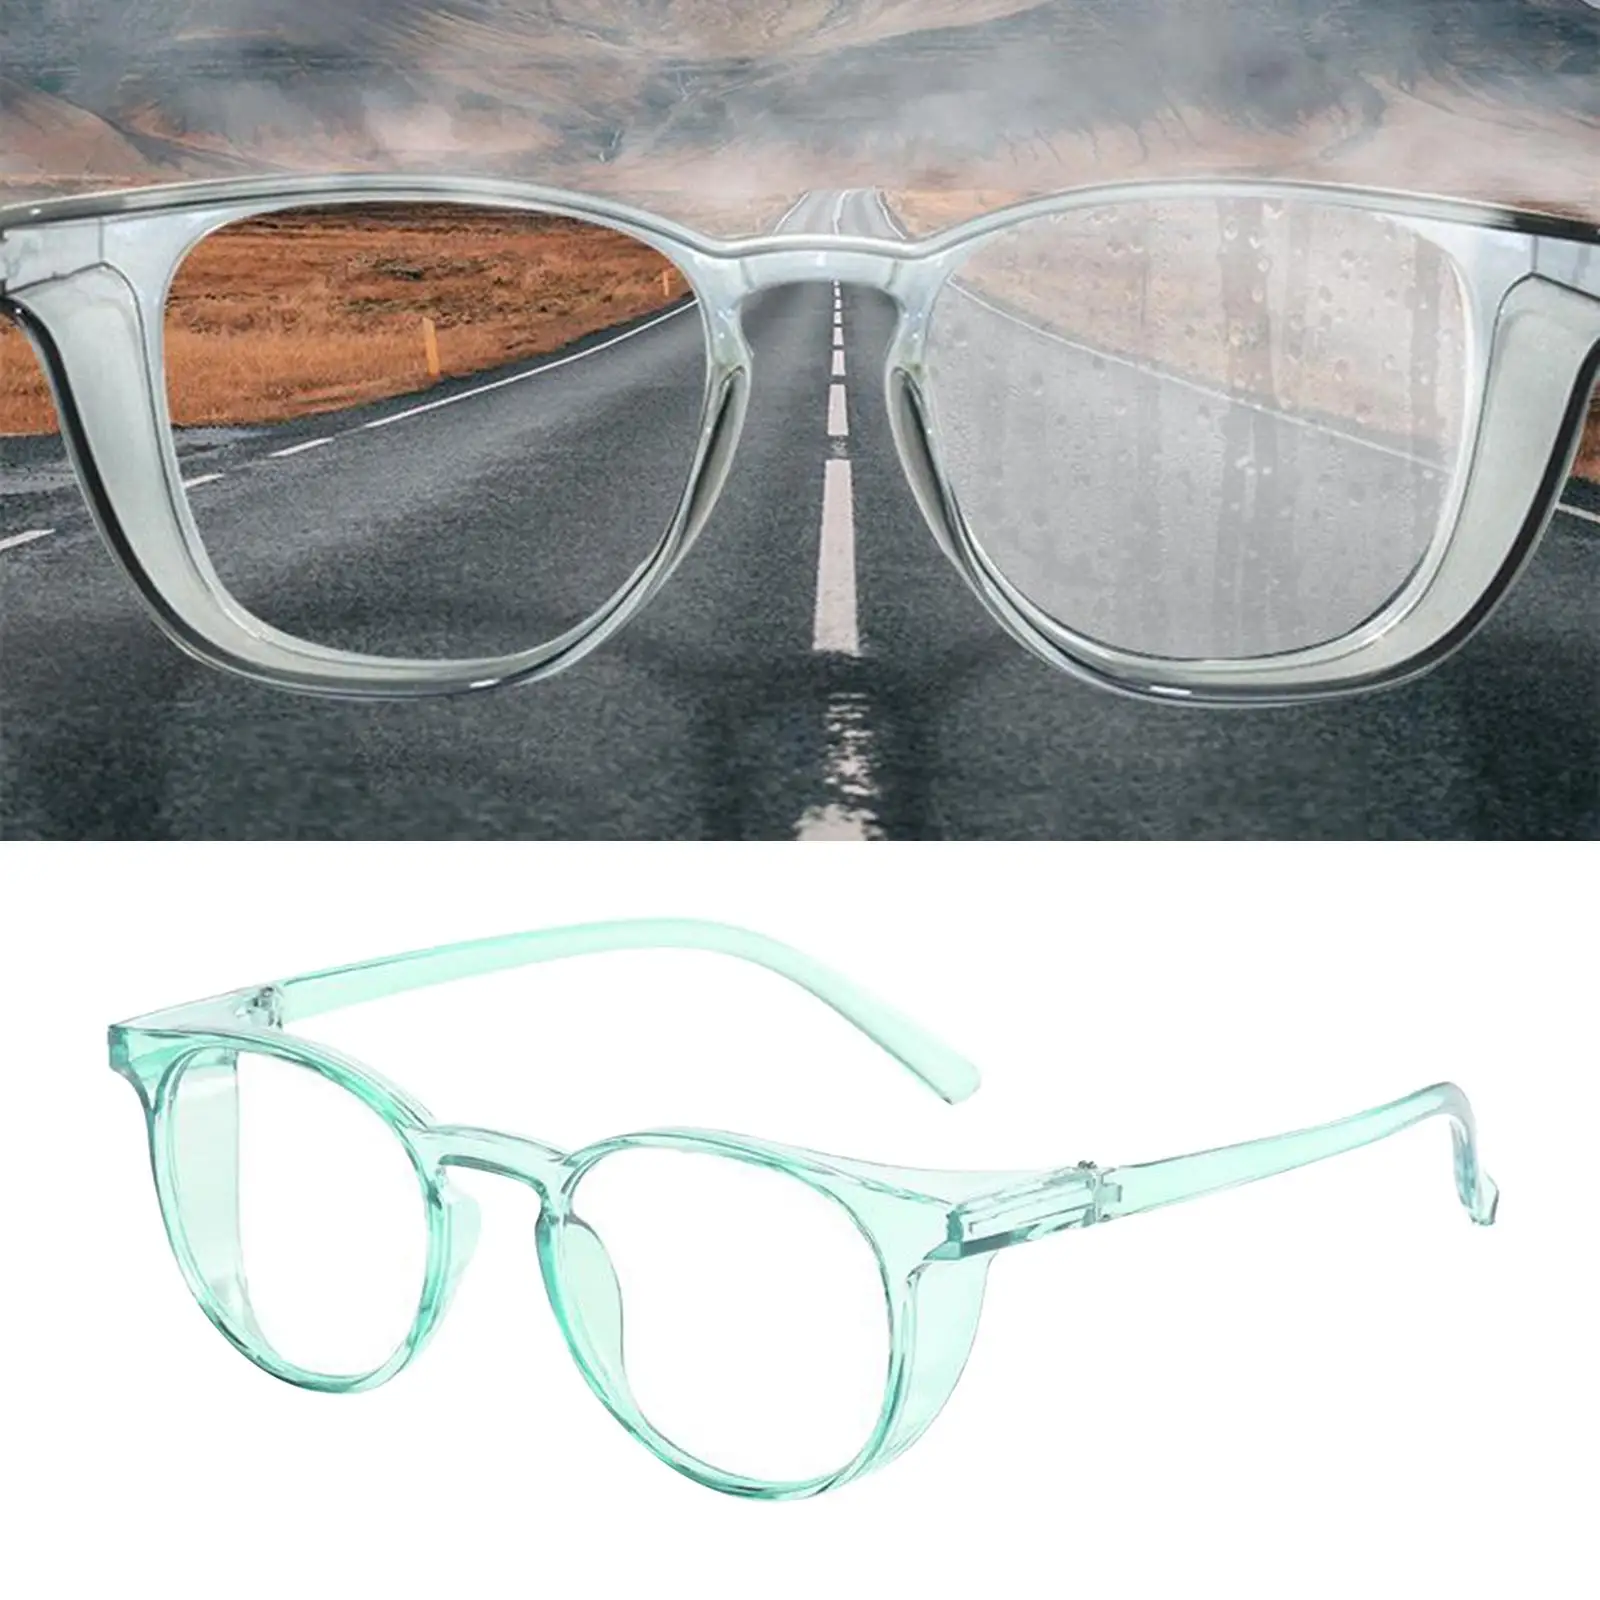 Transparent anti-fog   lens Safety glasses with workplace